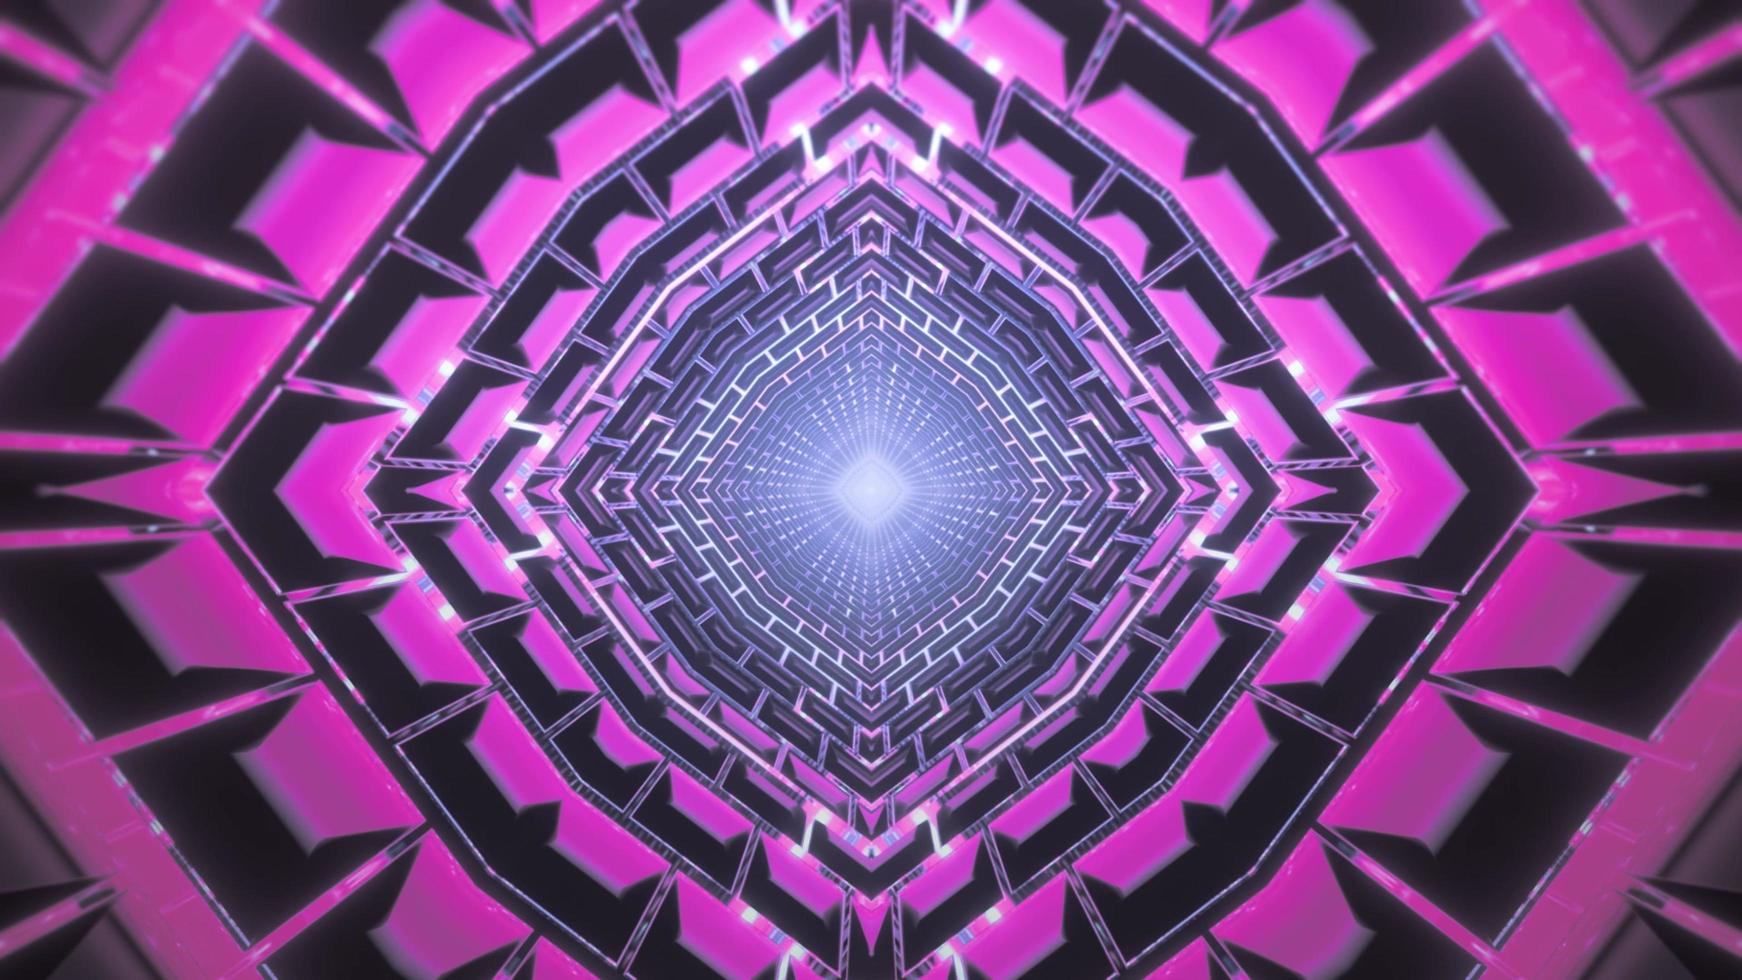 Colorful 3D kaleidoscope design illustration for background or texture photo